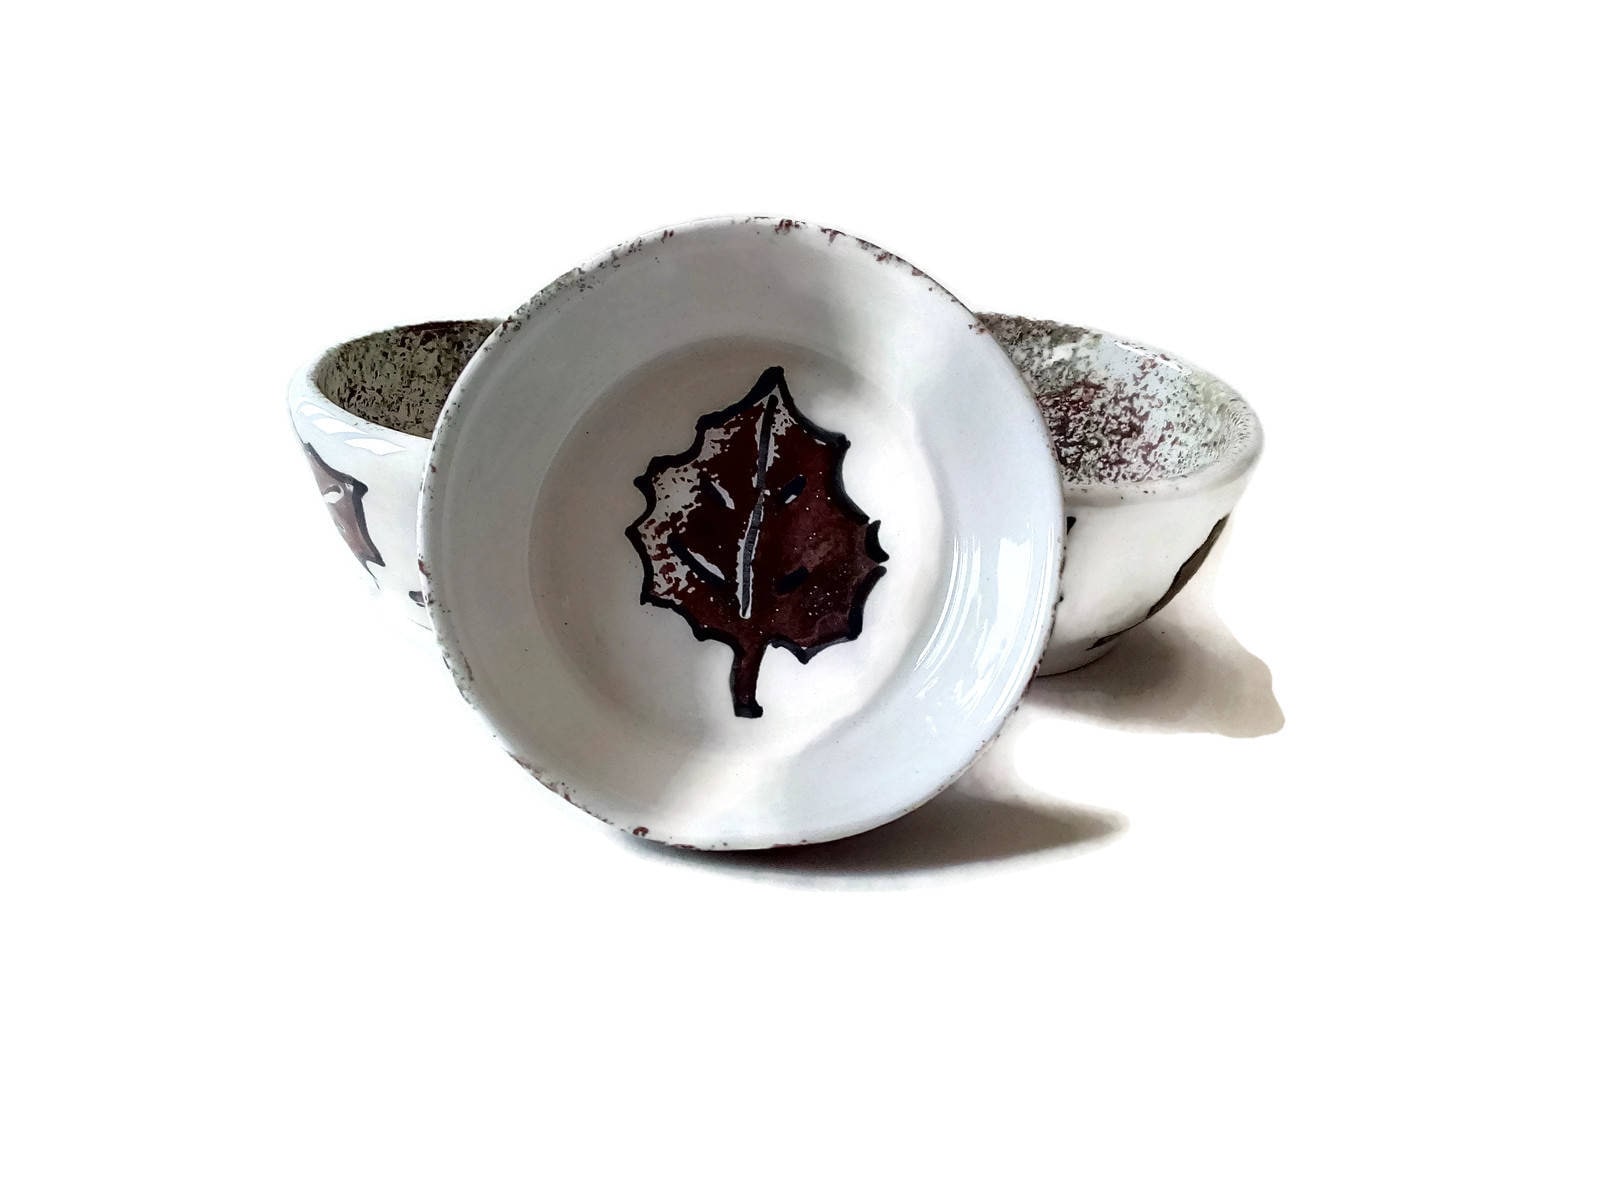 3Pc Handmade Ceramic Bowl Set With Hand Painted Leaves, Pottery Autumn Home Decor, Unique Gifts For Bakers, Mom Birthday gift From Daughter - Ceramica Ana Rafael